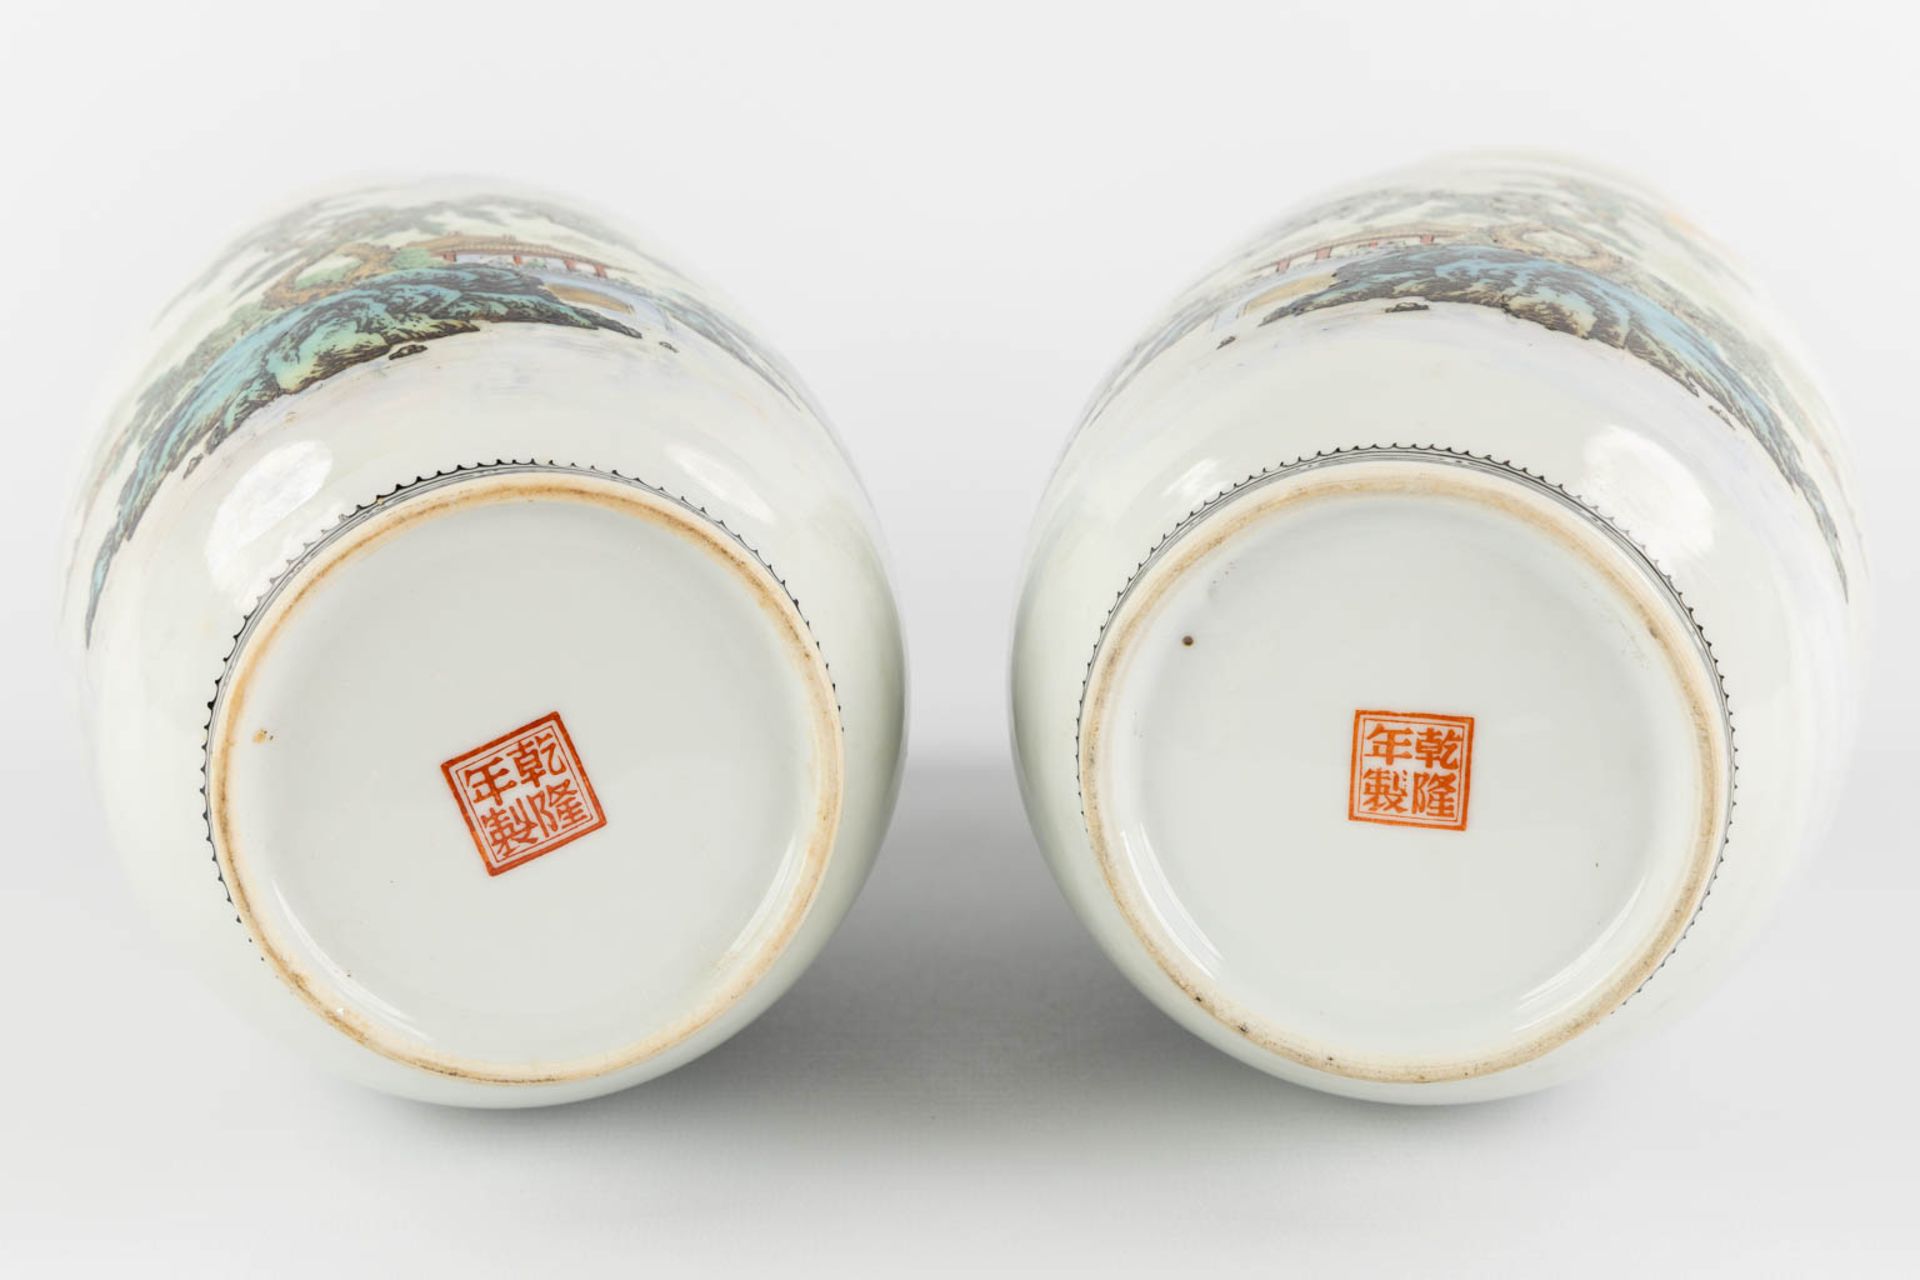 A pair of Chinese vases with a mountain landscape, 20th C. (H:24 x D:14 cm) - Image 6 of 12